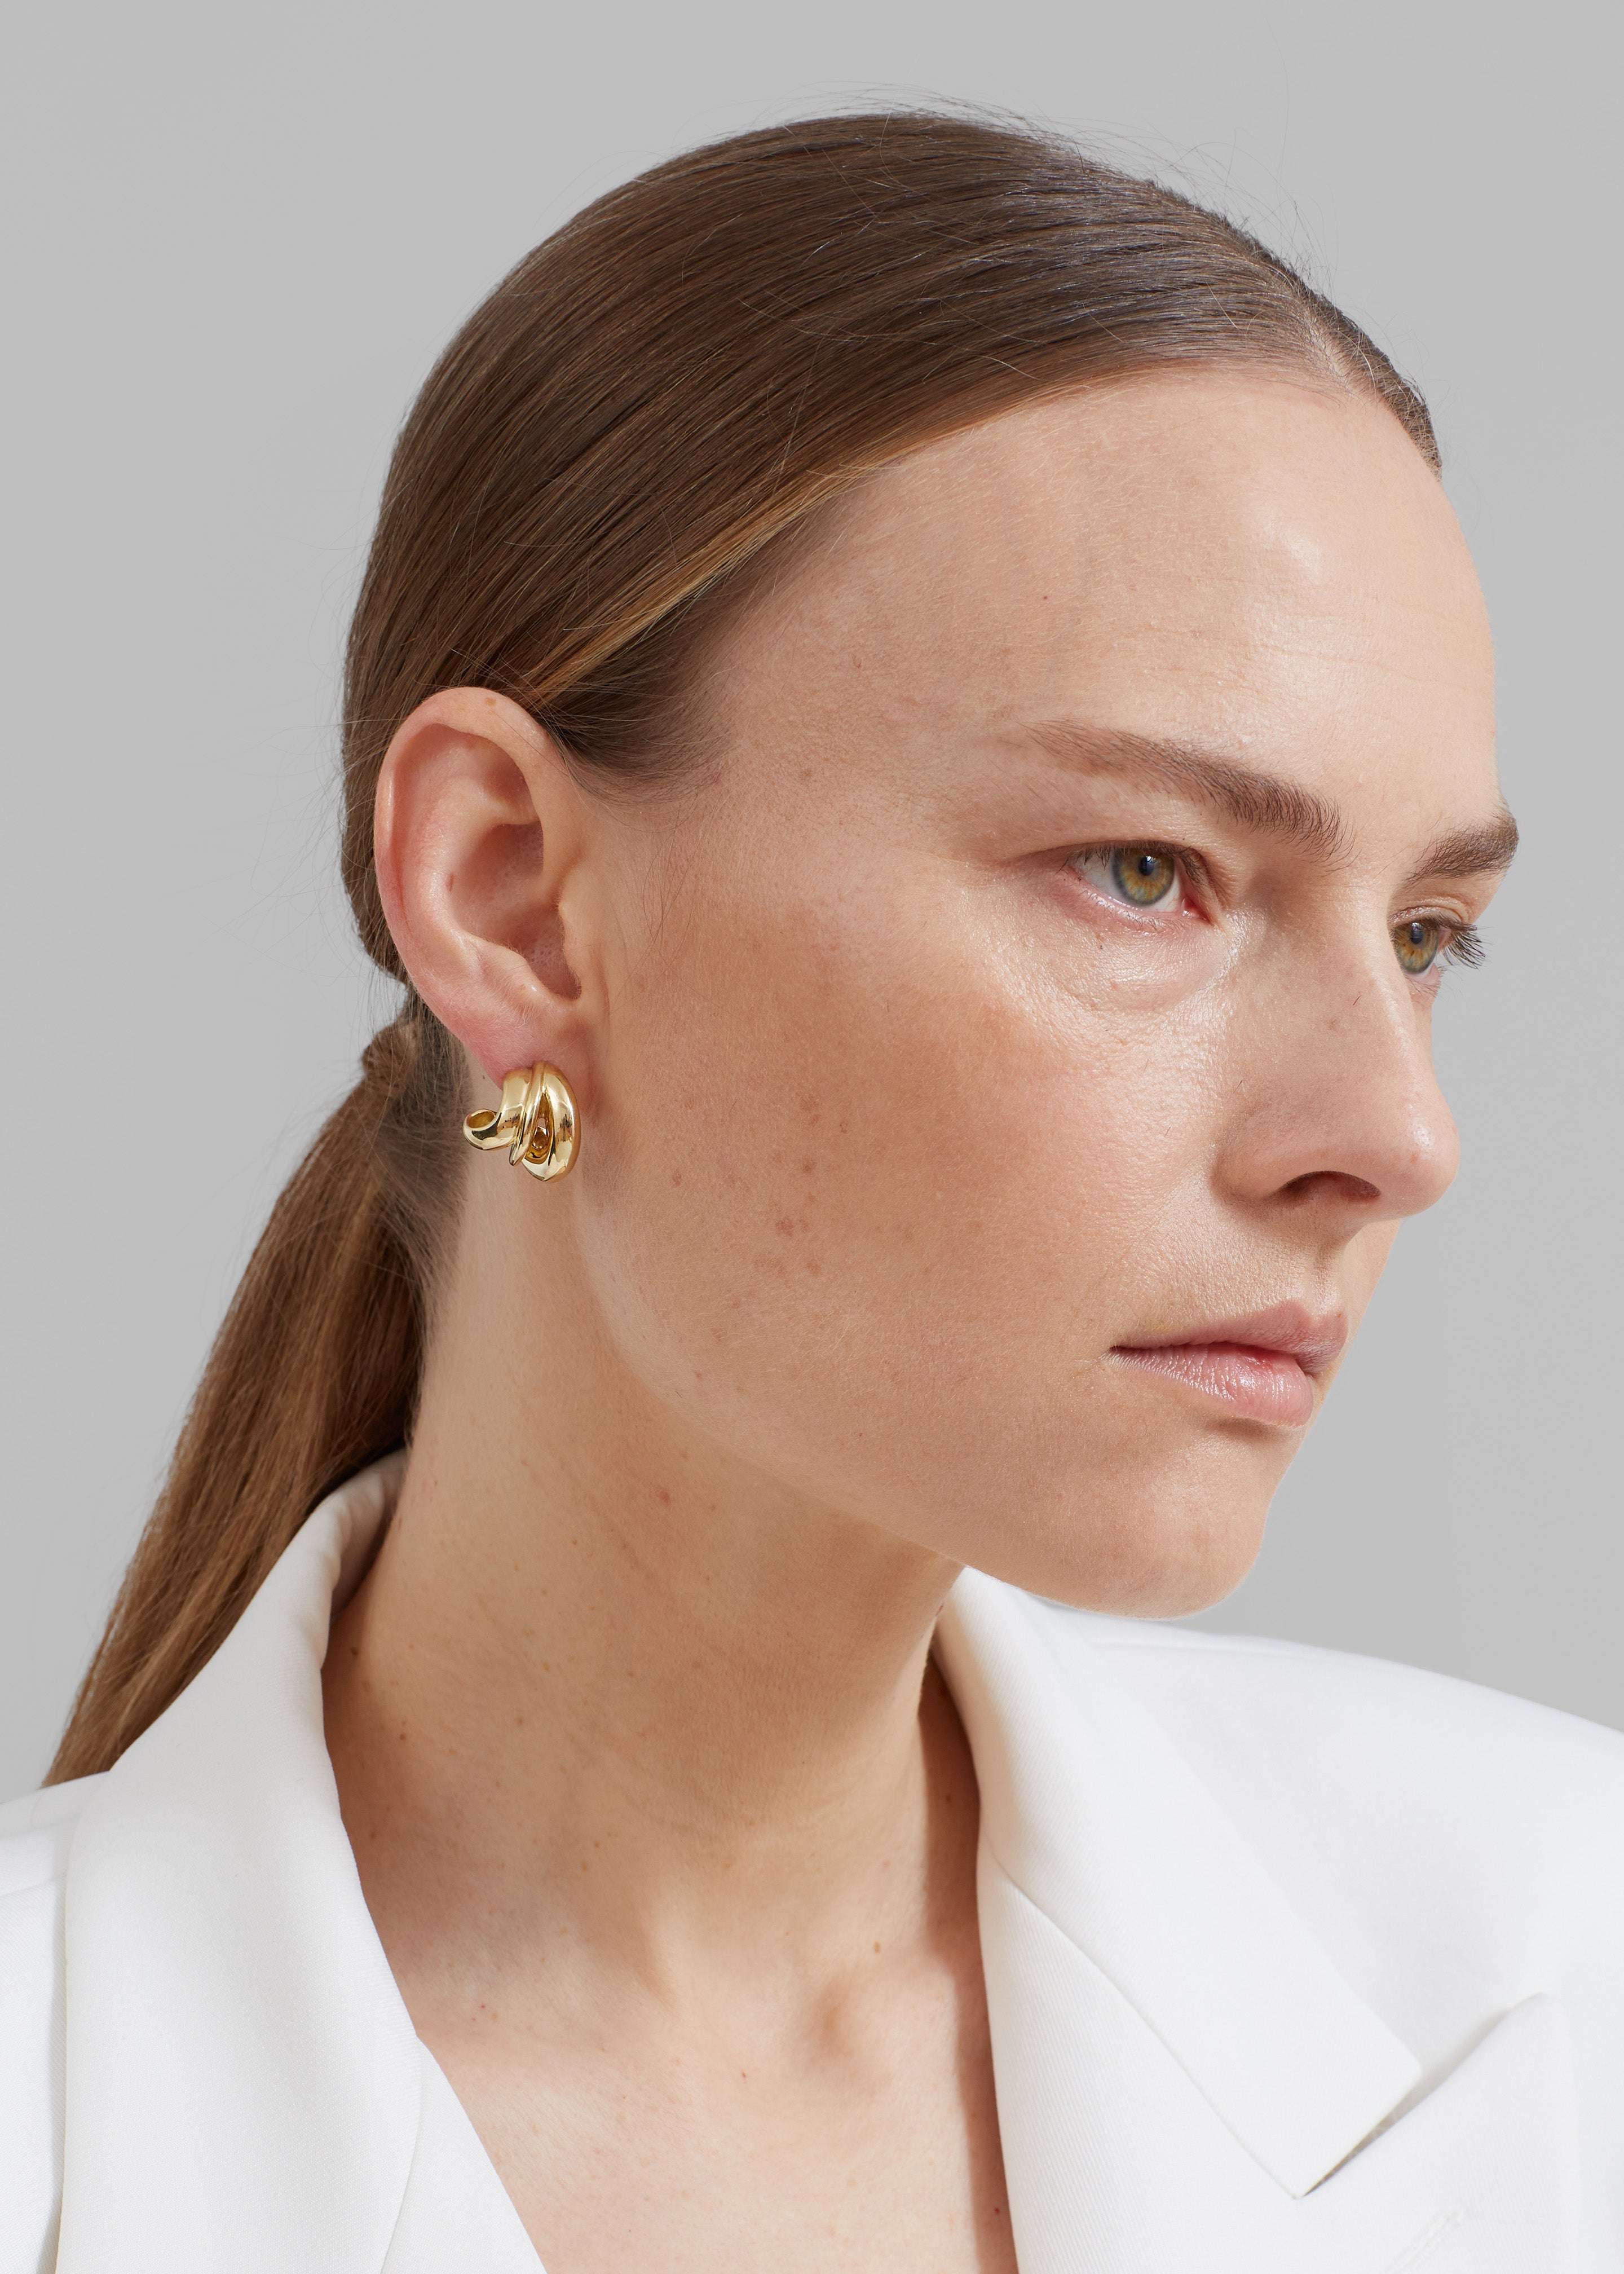 Completedworks The Comeback Kid Earrings - Gold - 4